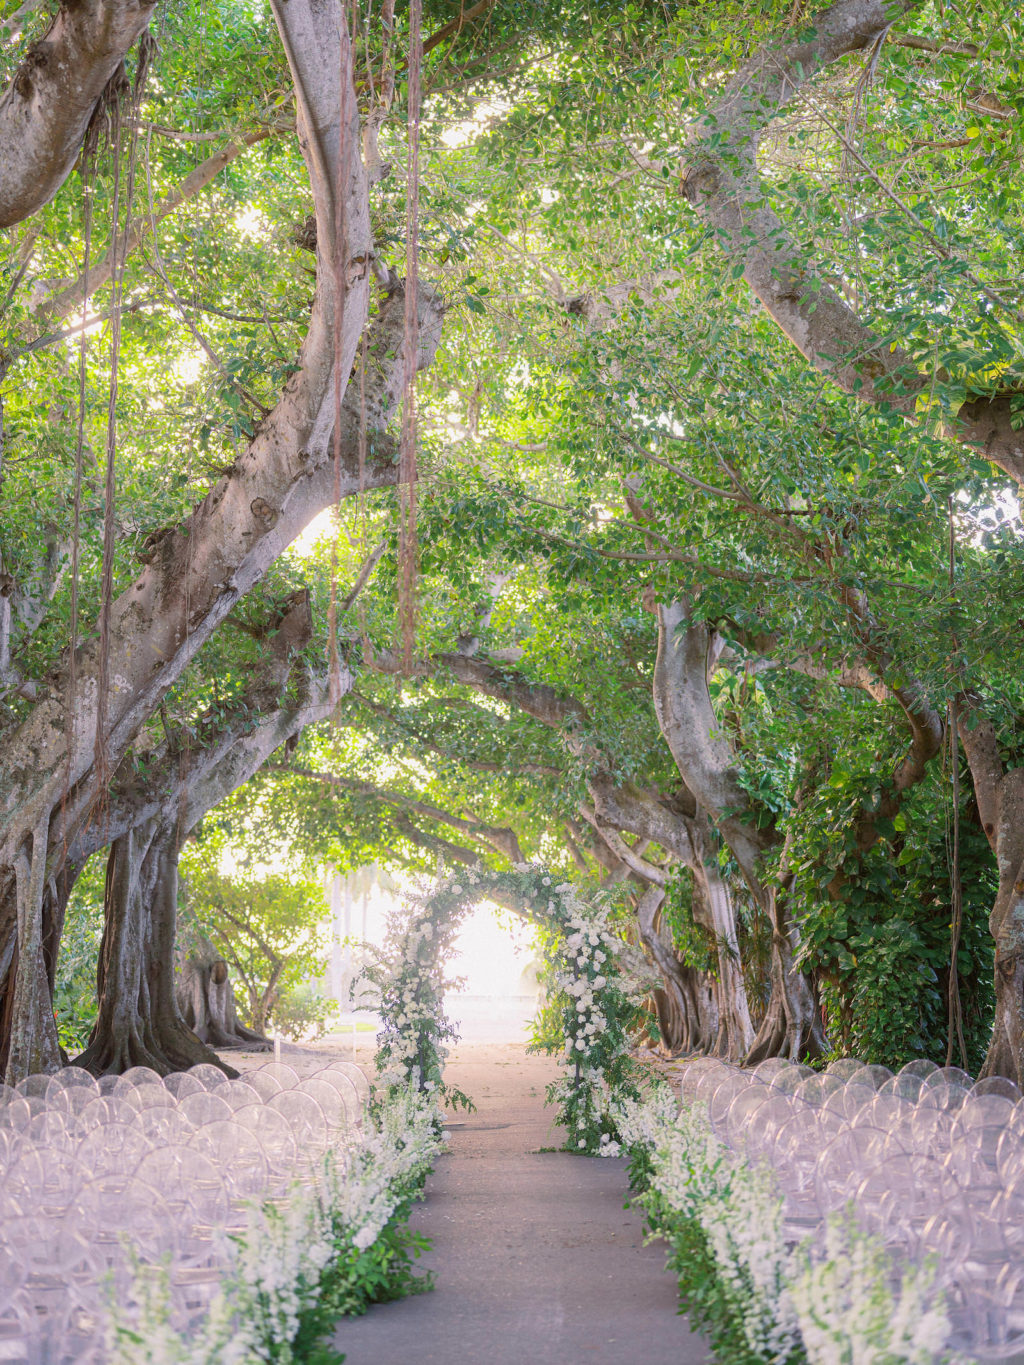 Elegant Luxurious Classic Outdoor Wedding Ceremony Decor Under Banyan Trees, Acrylic Ghost Chairs with Lush White and Greenery Floral Arrangements, Semi Circle Flower and Greenery Wedding Ceremony Arch | Tampa Bay Wedding Venue The Gasparilla Inn and Club